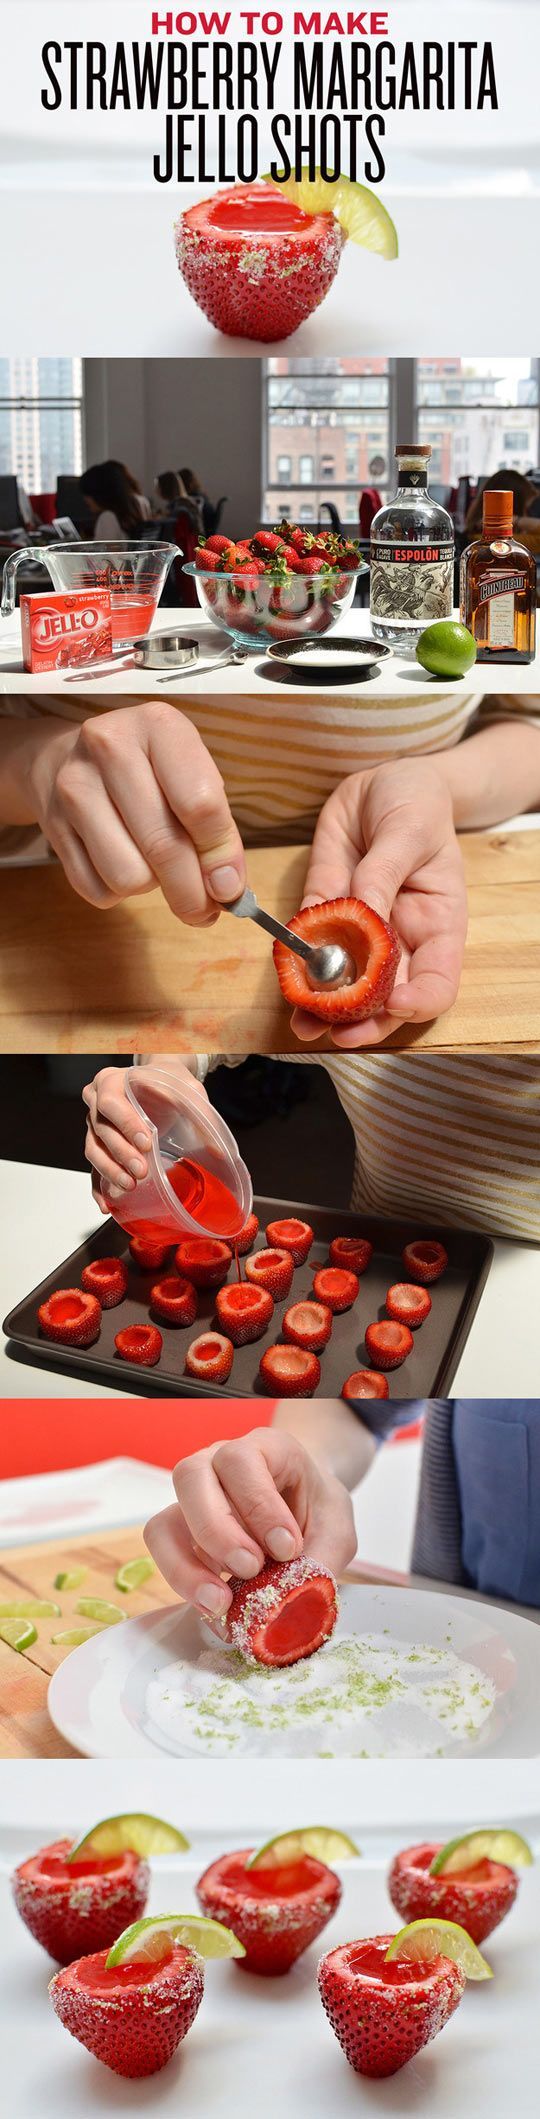 Holy cow. This is one Jell-O shot I would take.